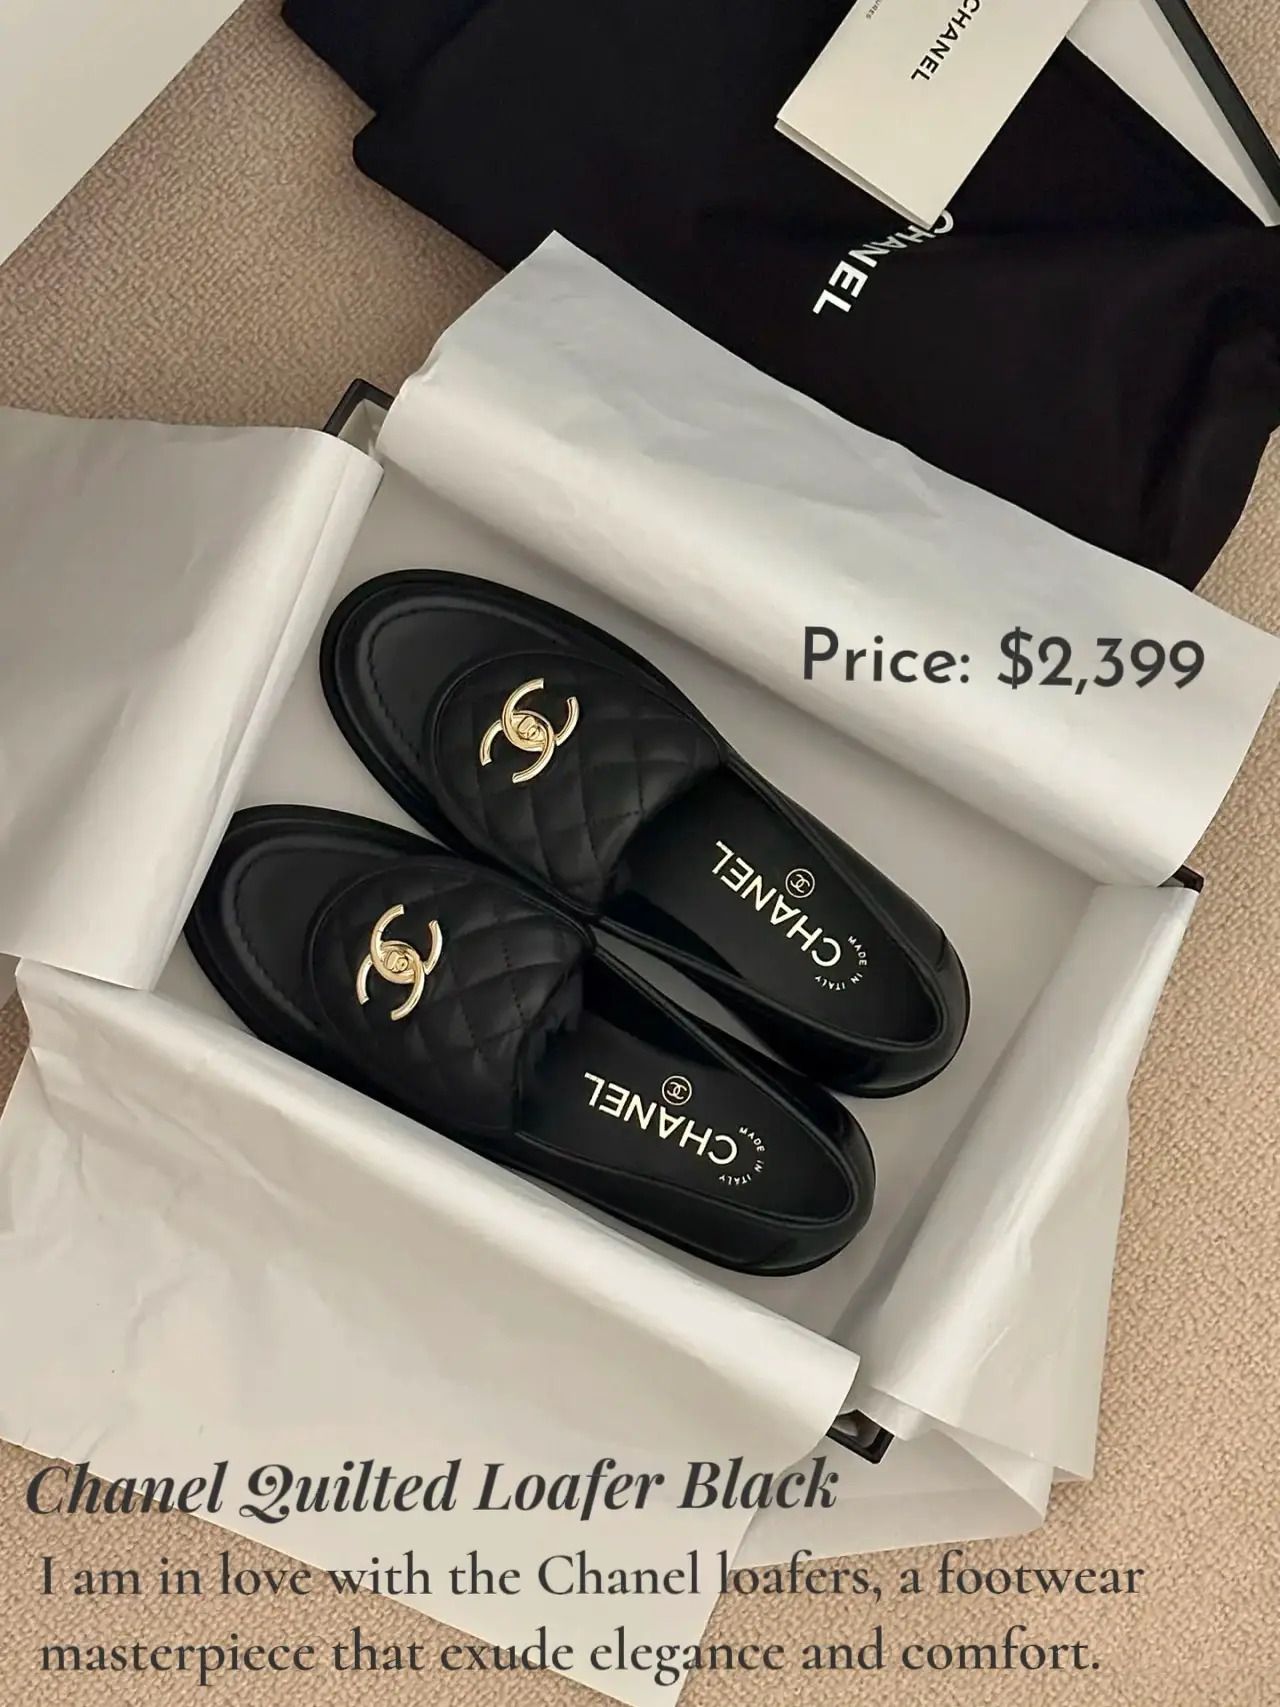 Chanel Quilted Loafer Black Review, Gallery posted by Ashy Patterson